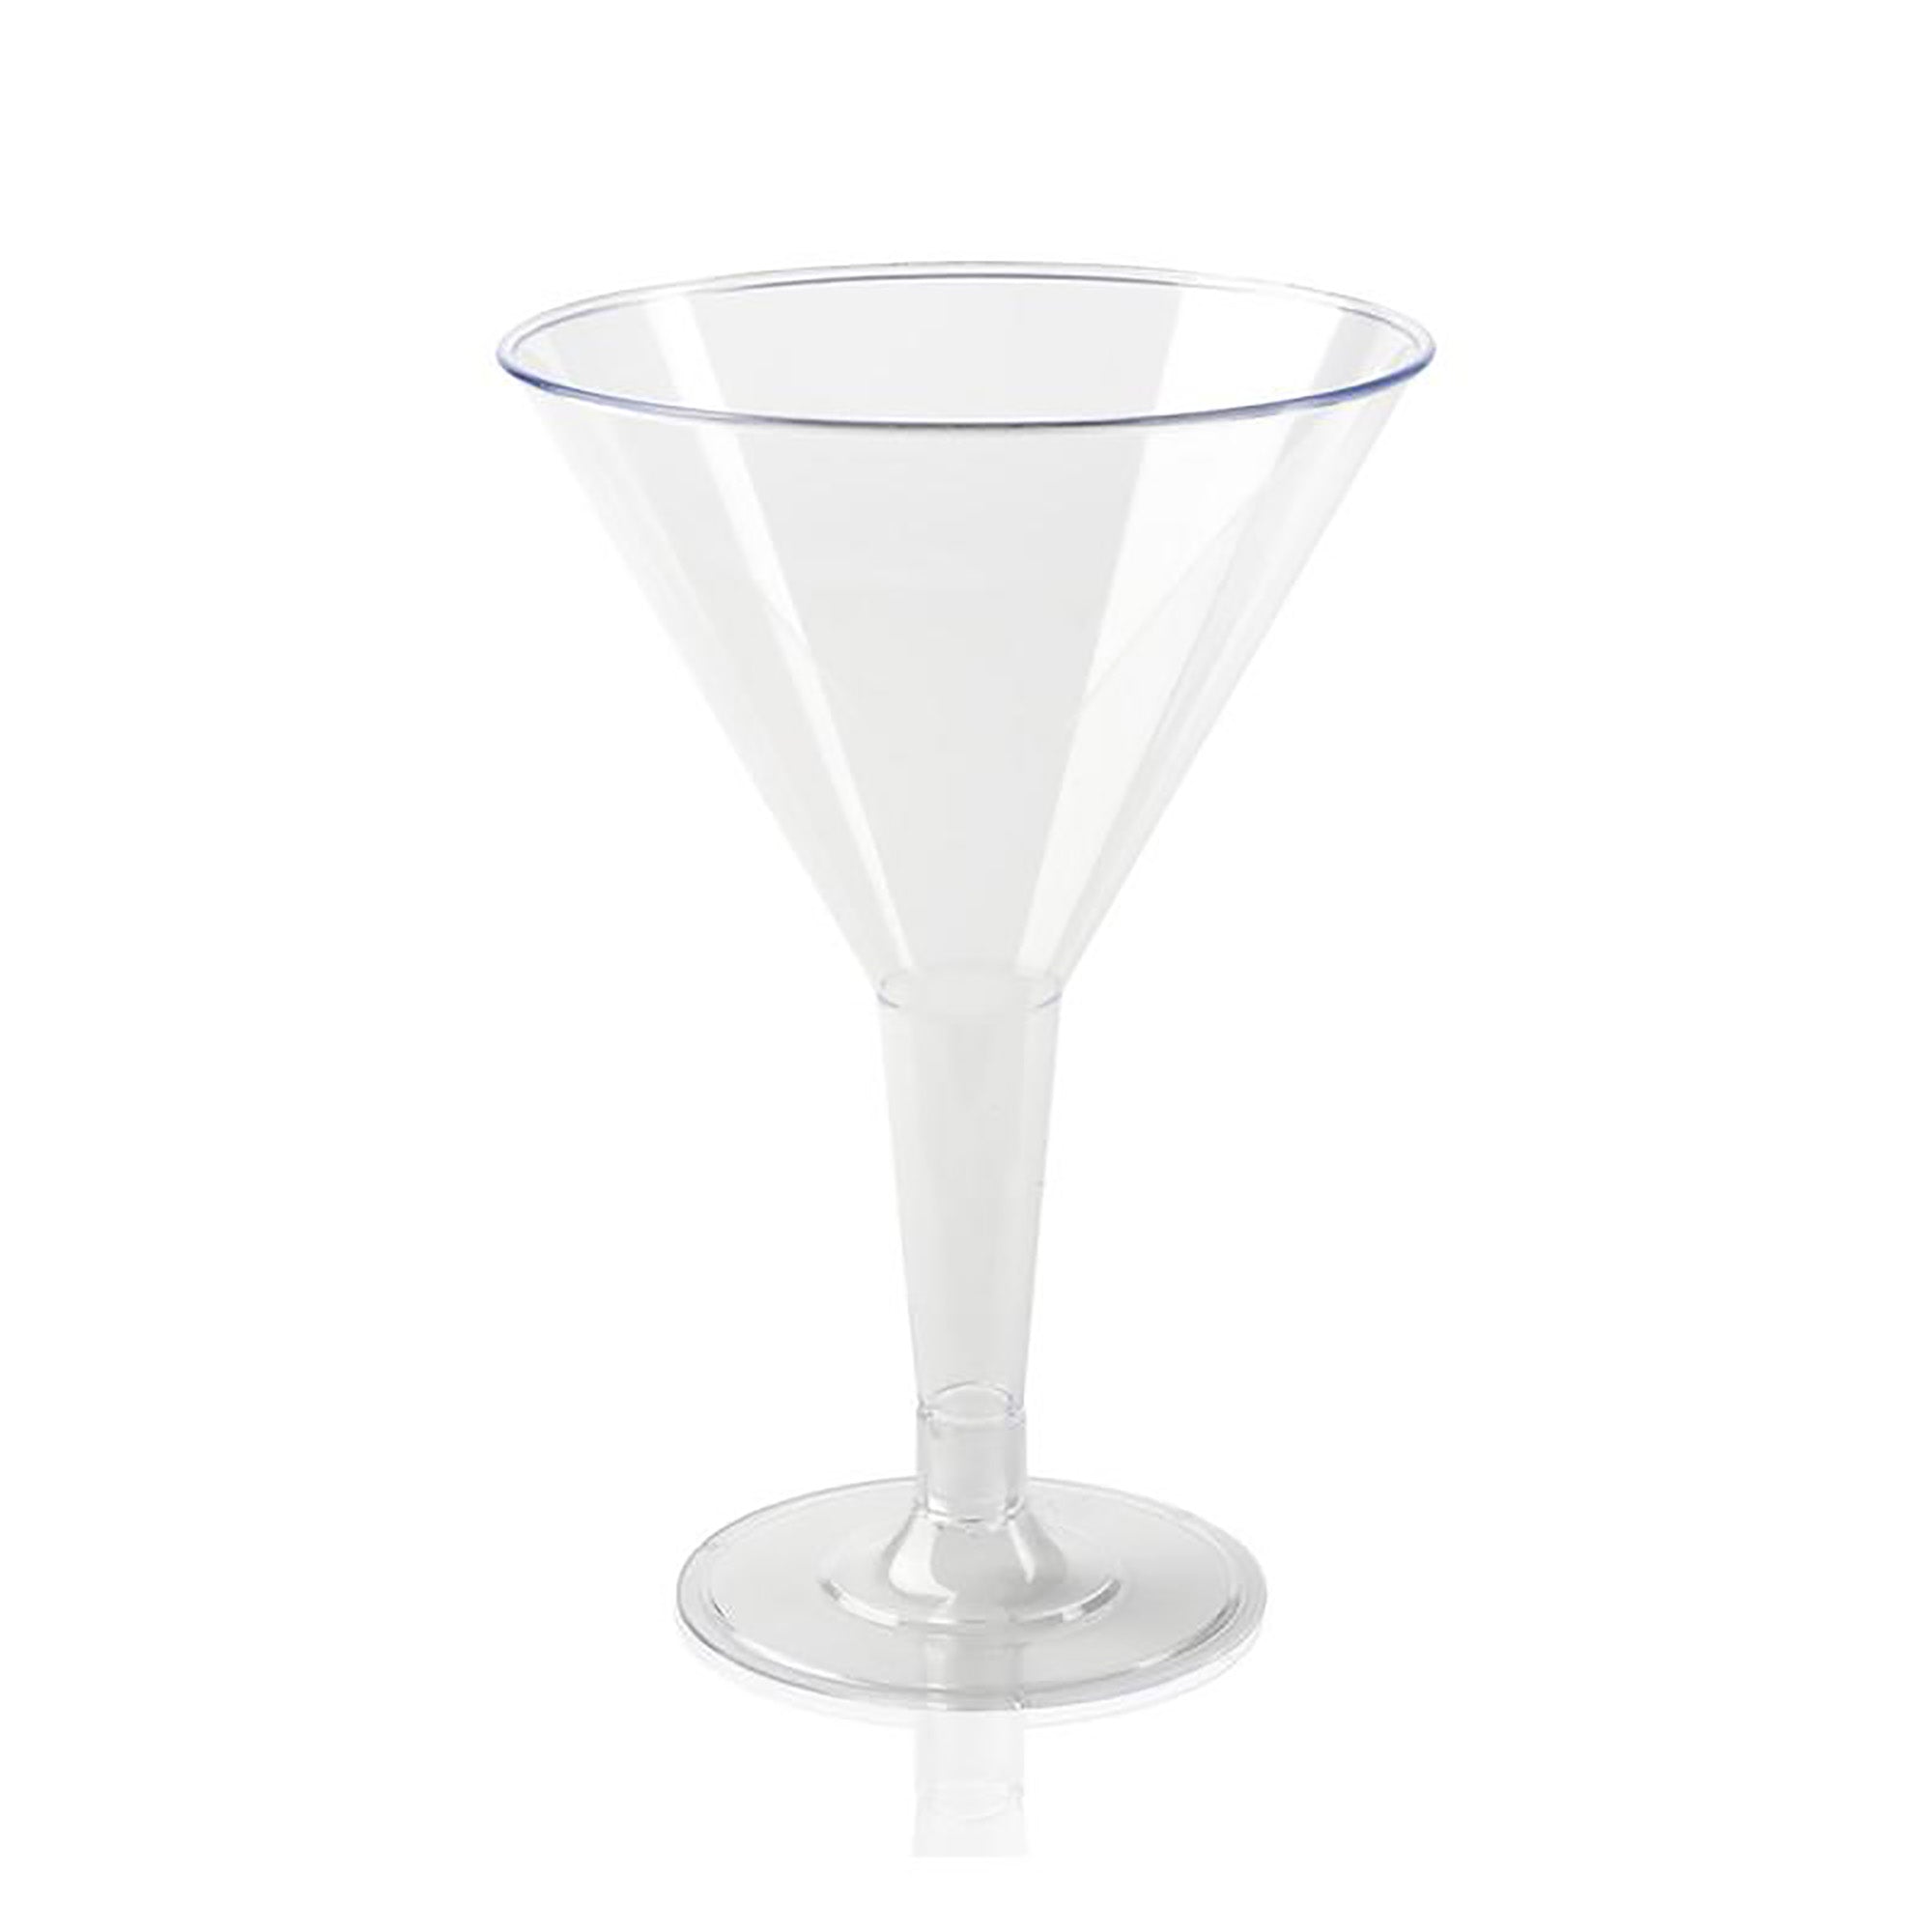 Christmas. Cocktail Glasses Perfect for Any Party Celebrations Reusable Recyclable 70 ml Durable & Unbreakable Clear Polystyrene Birthdays 48 Premium Disposable Mini Plastic Martini Glasses 